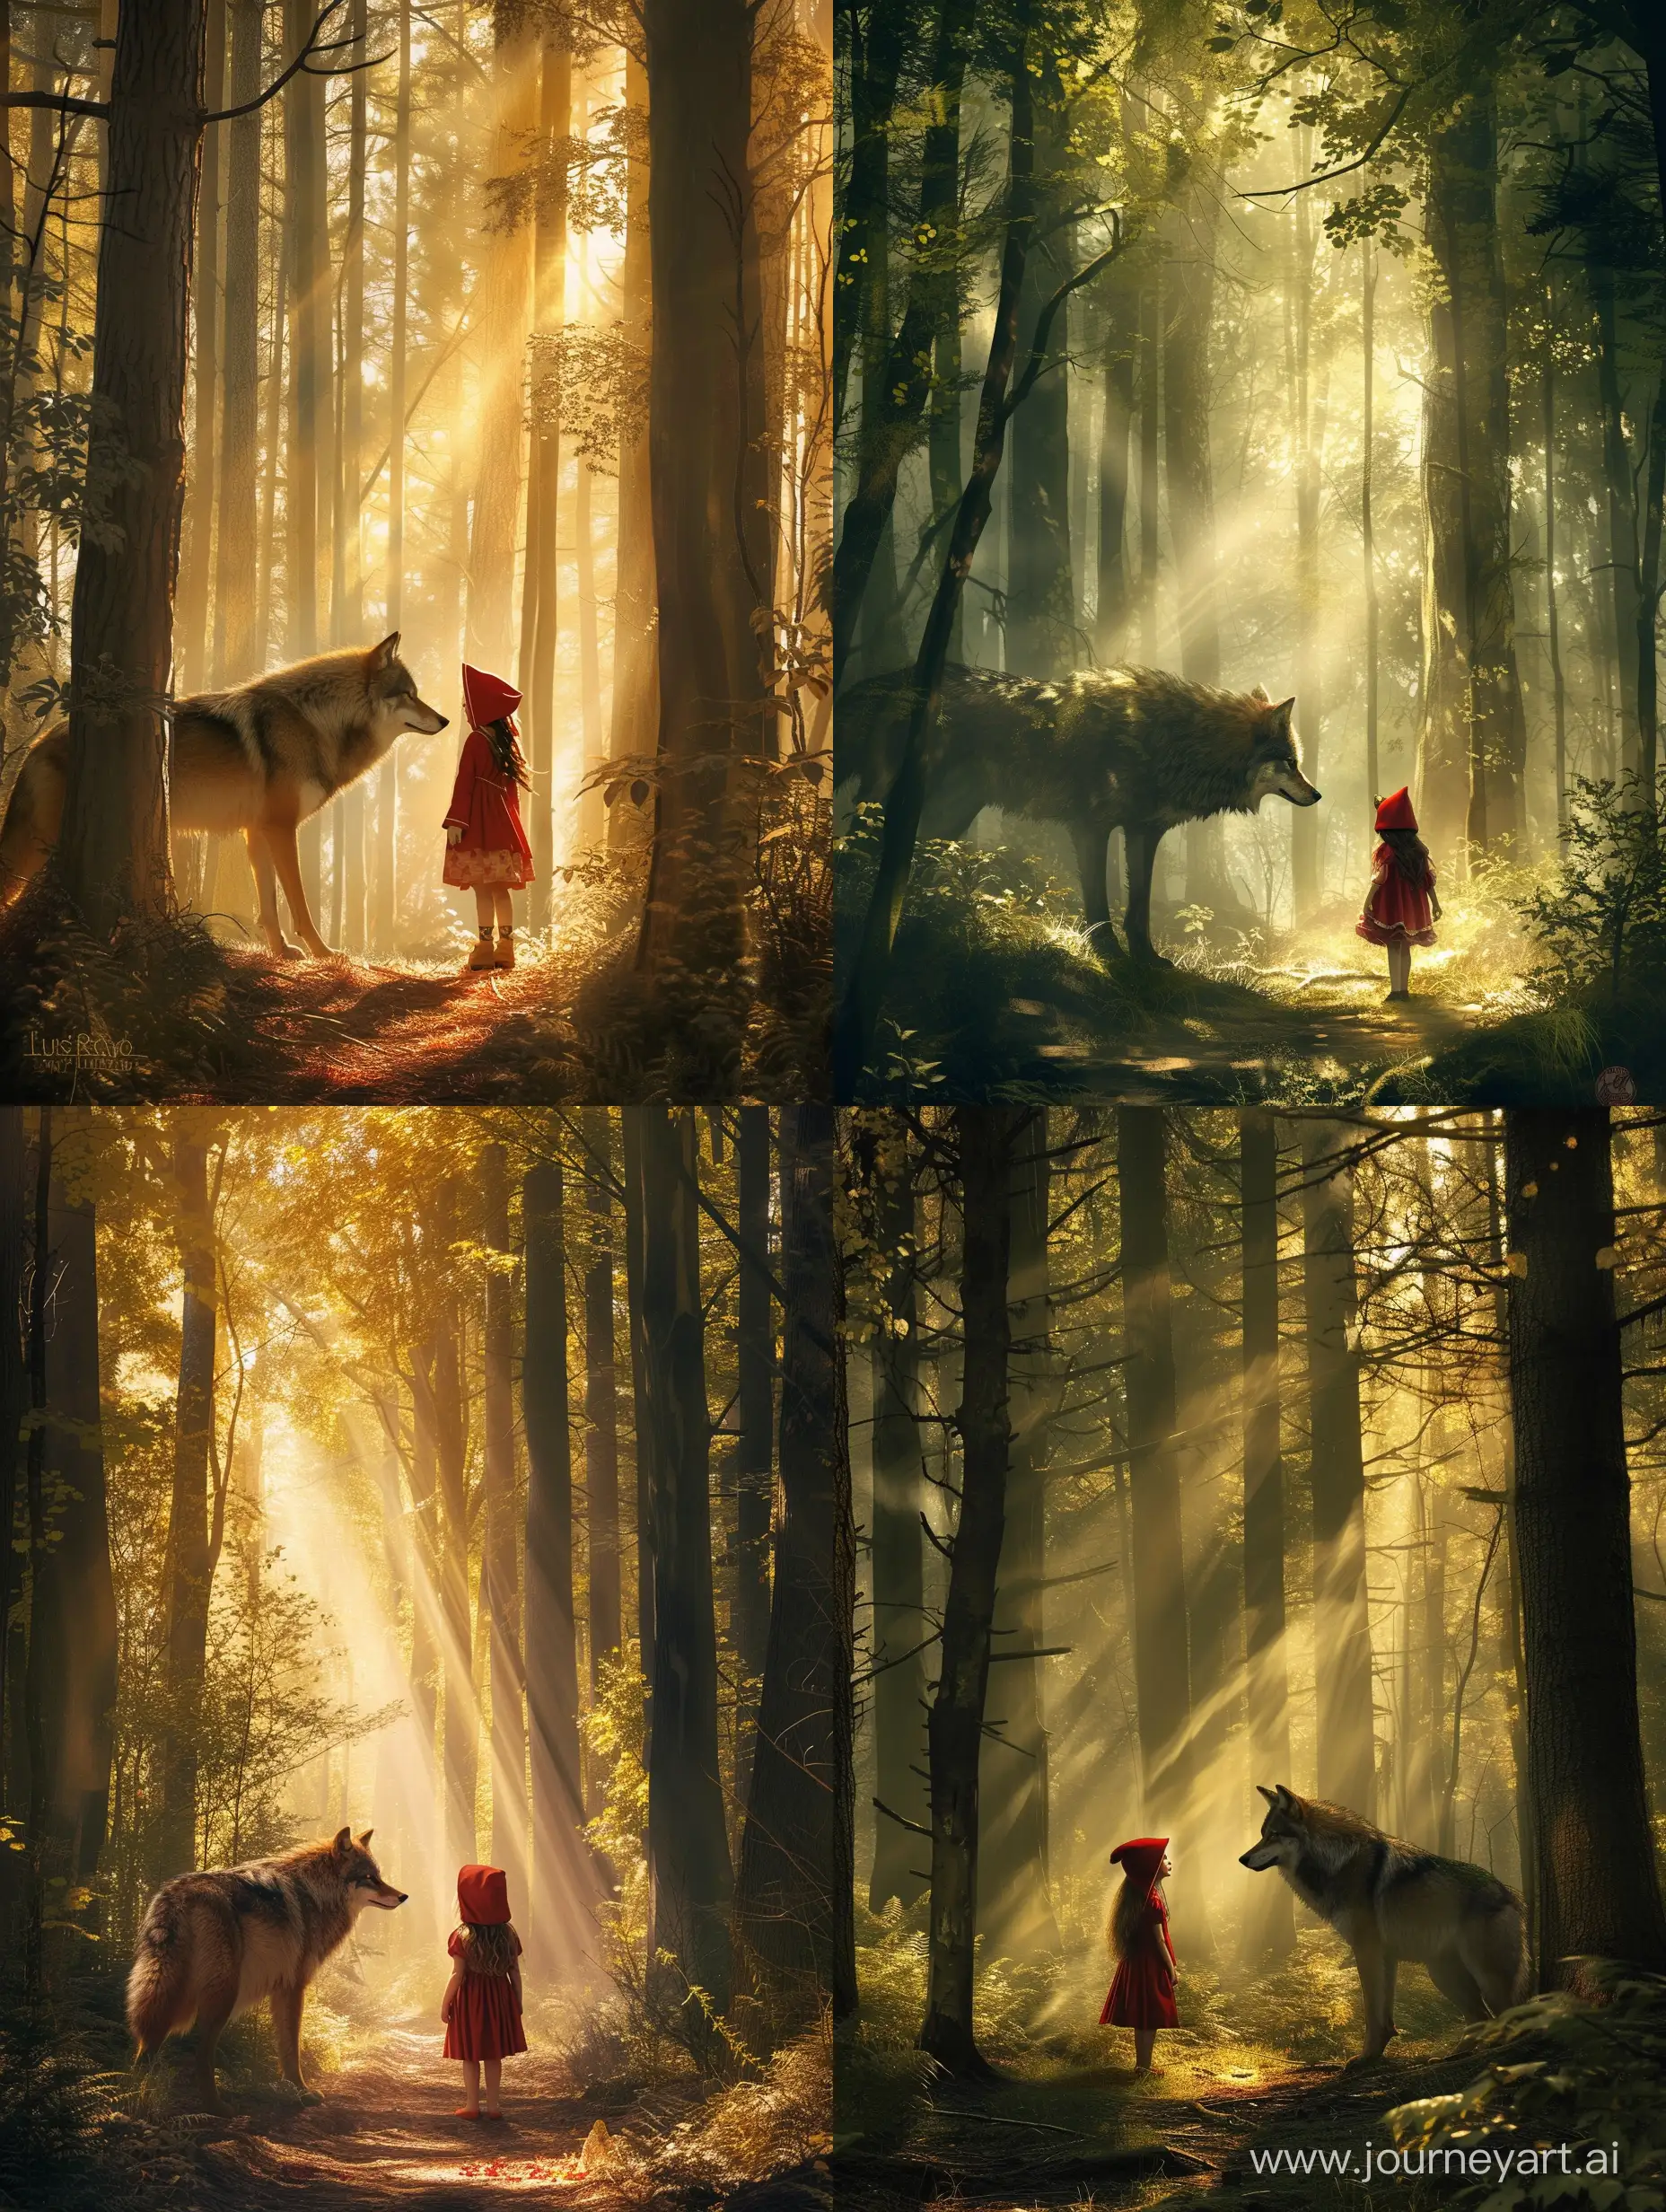 Little Red Riding Hood, a beautiful young girl and a big wolf, forest, light passing through the trees, in the style of Luis Royo - raw style